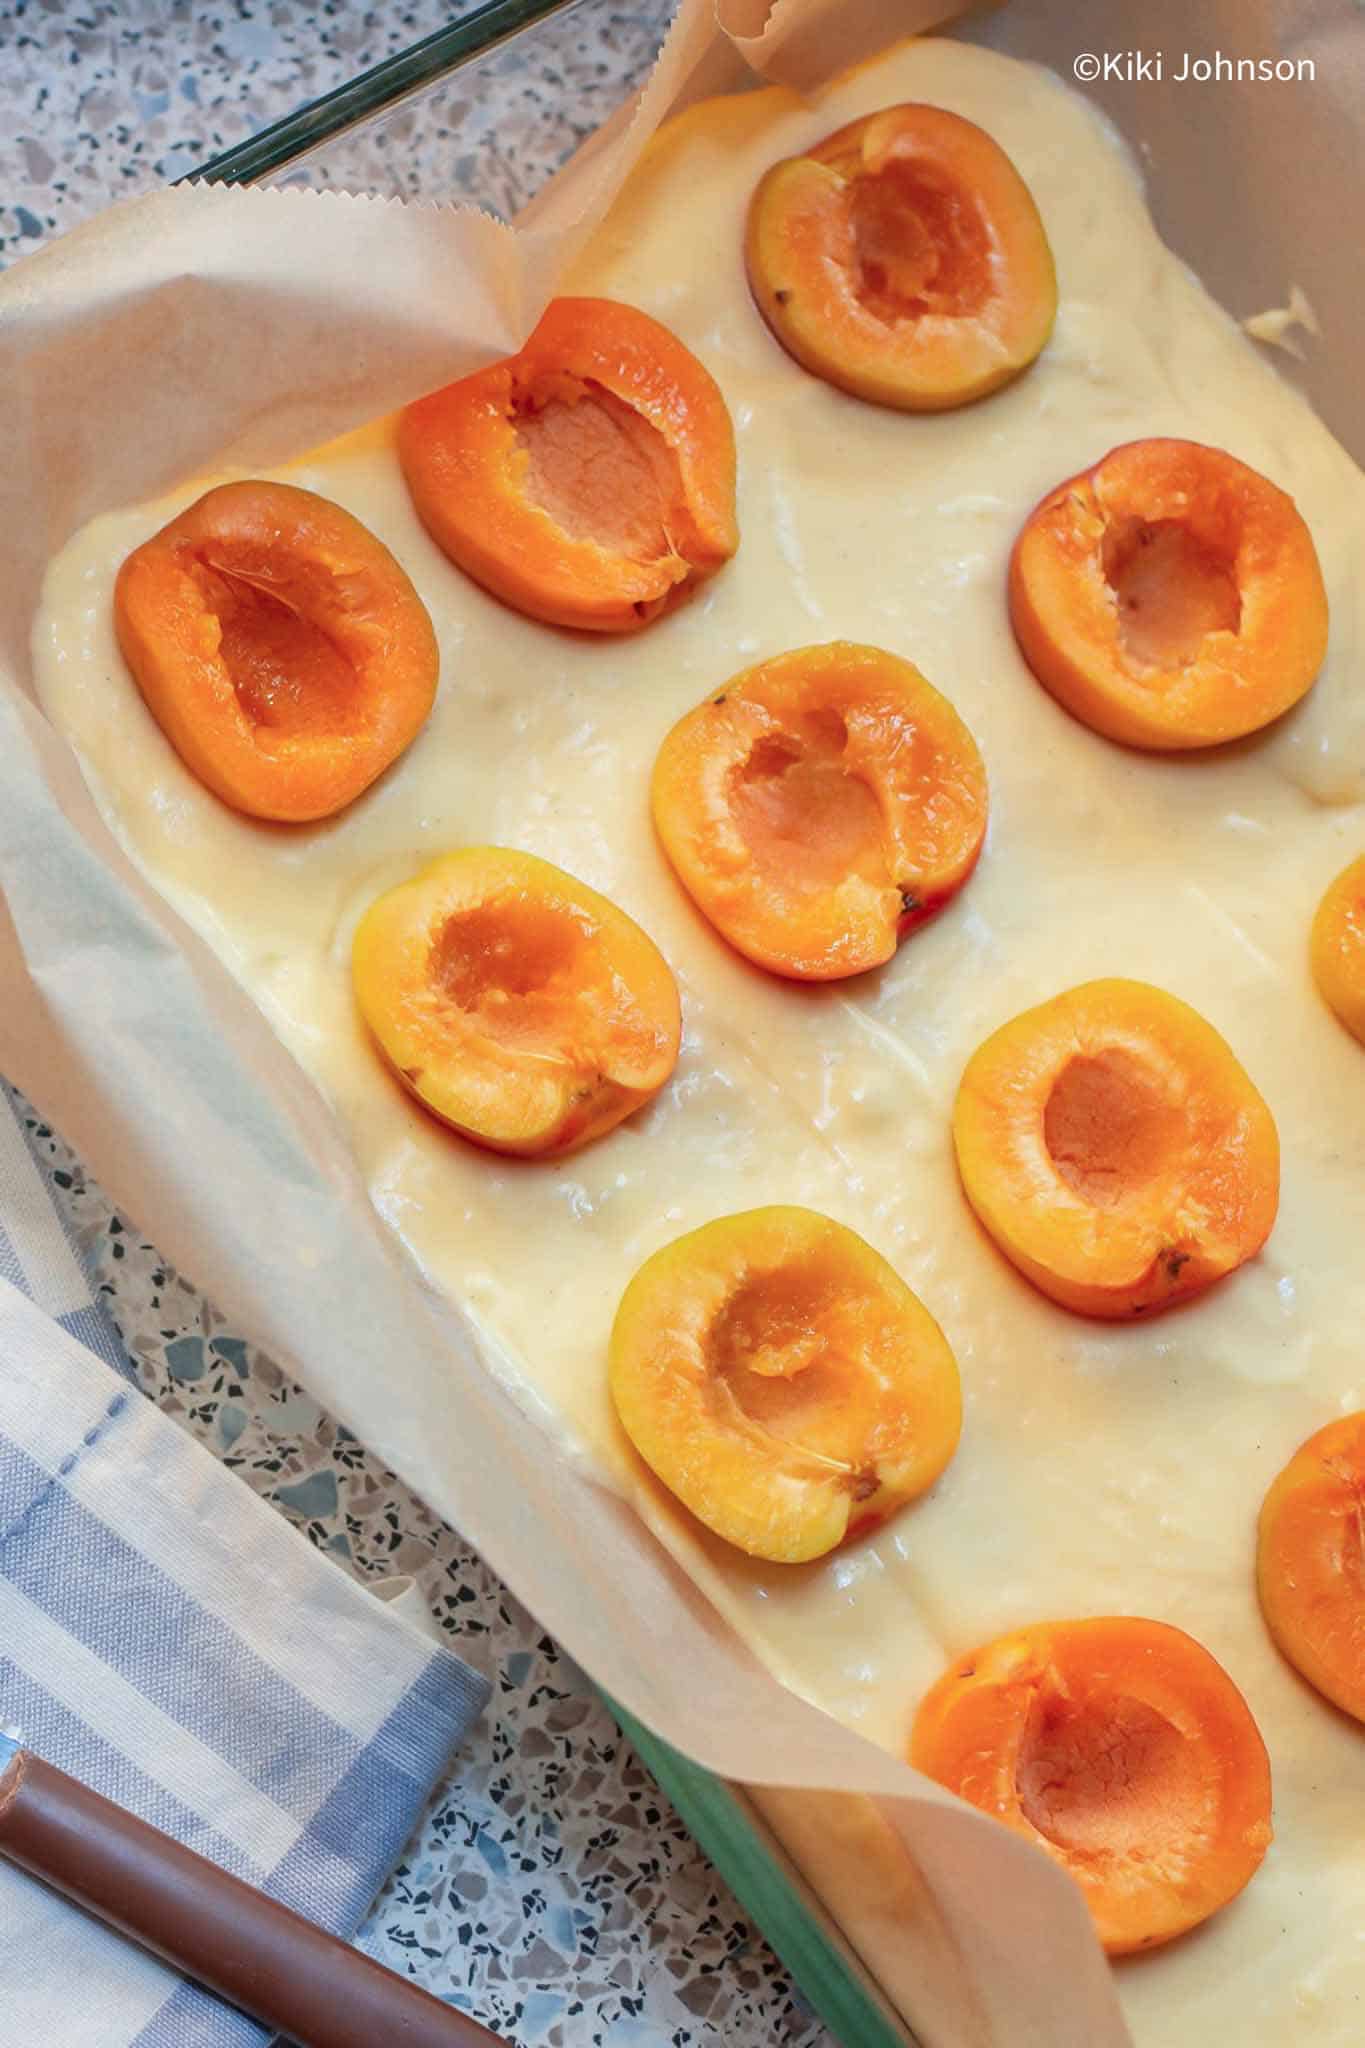 fresh apricot halves being placed on sponge cake batter to make apricot cake recipe.